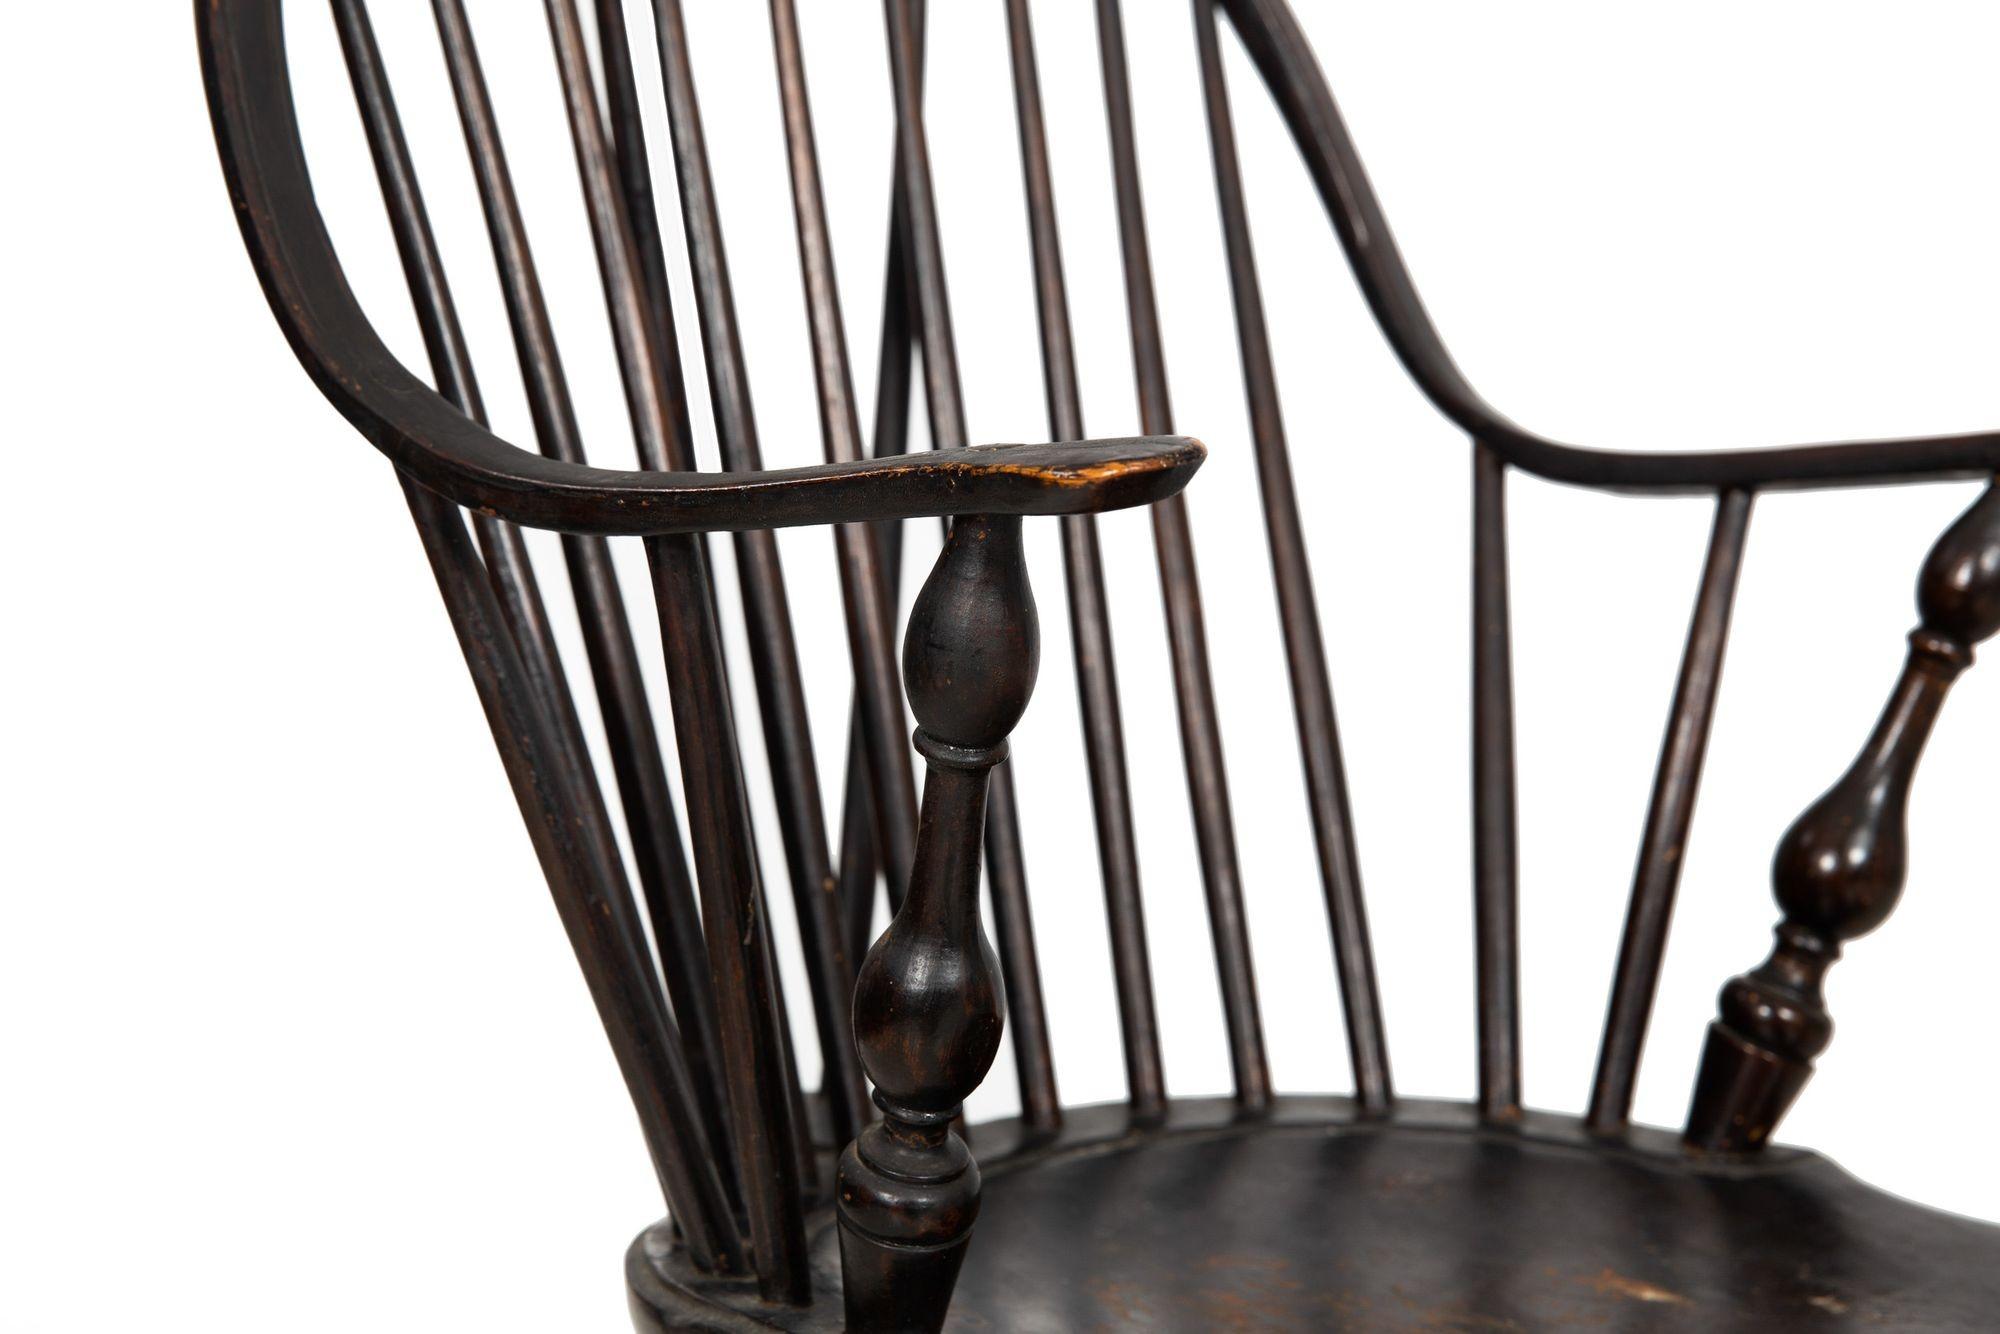 Rare American Brace-Back Continuous Arm Windsor Chair, New York ca. 1790 11